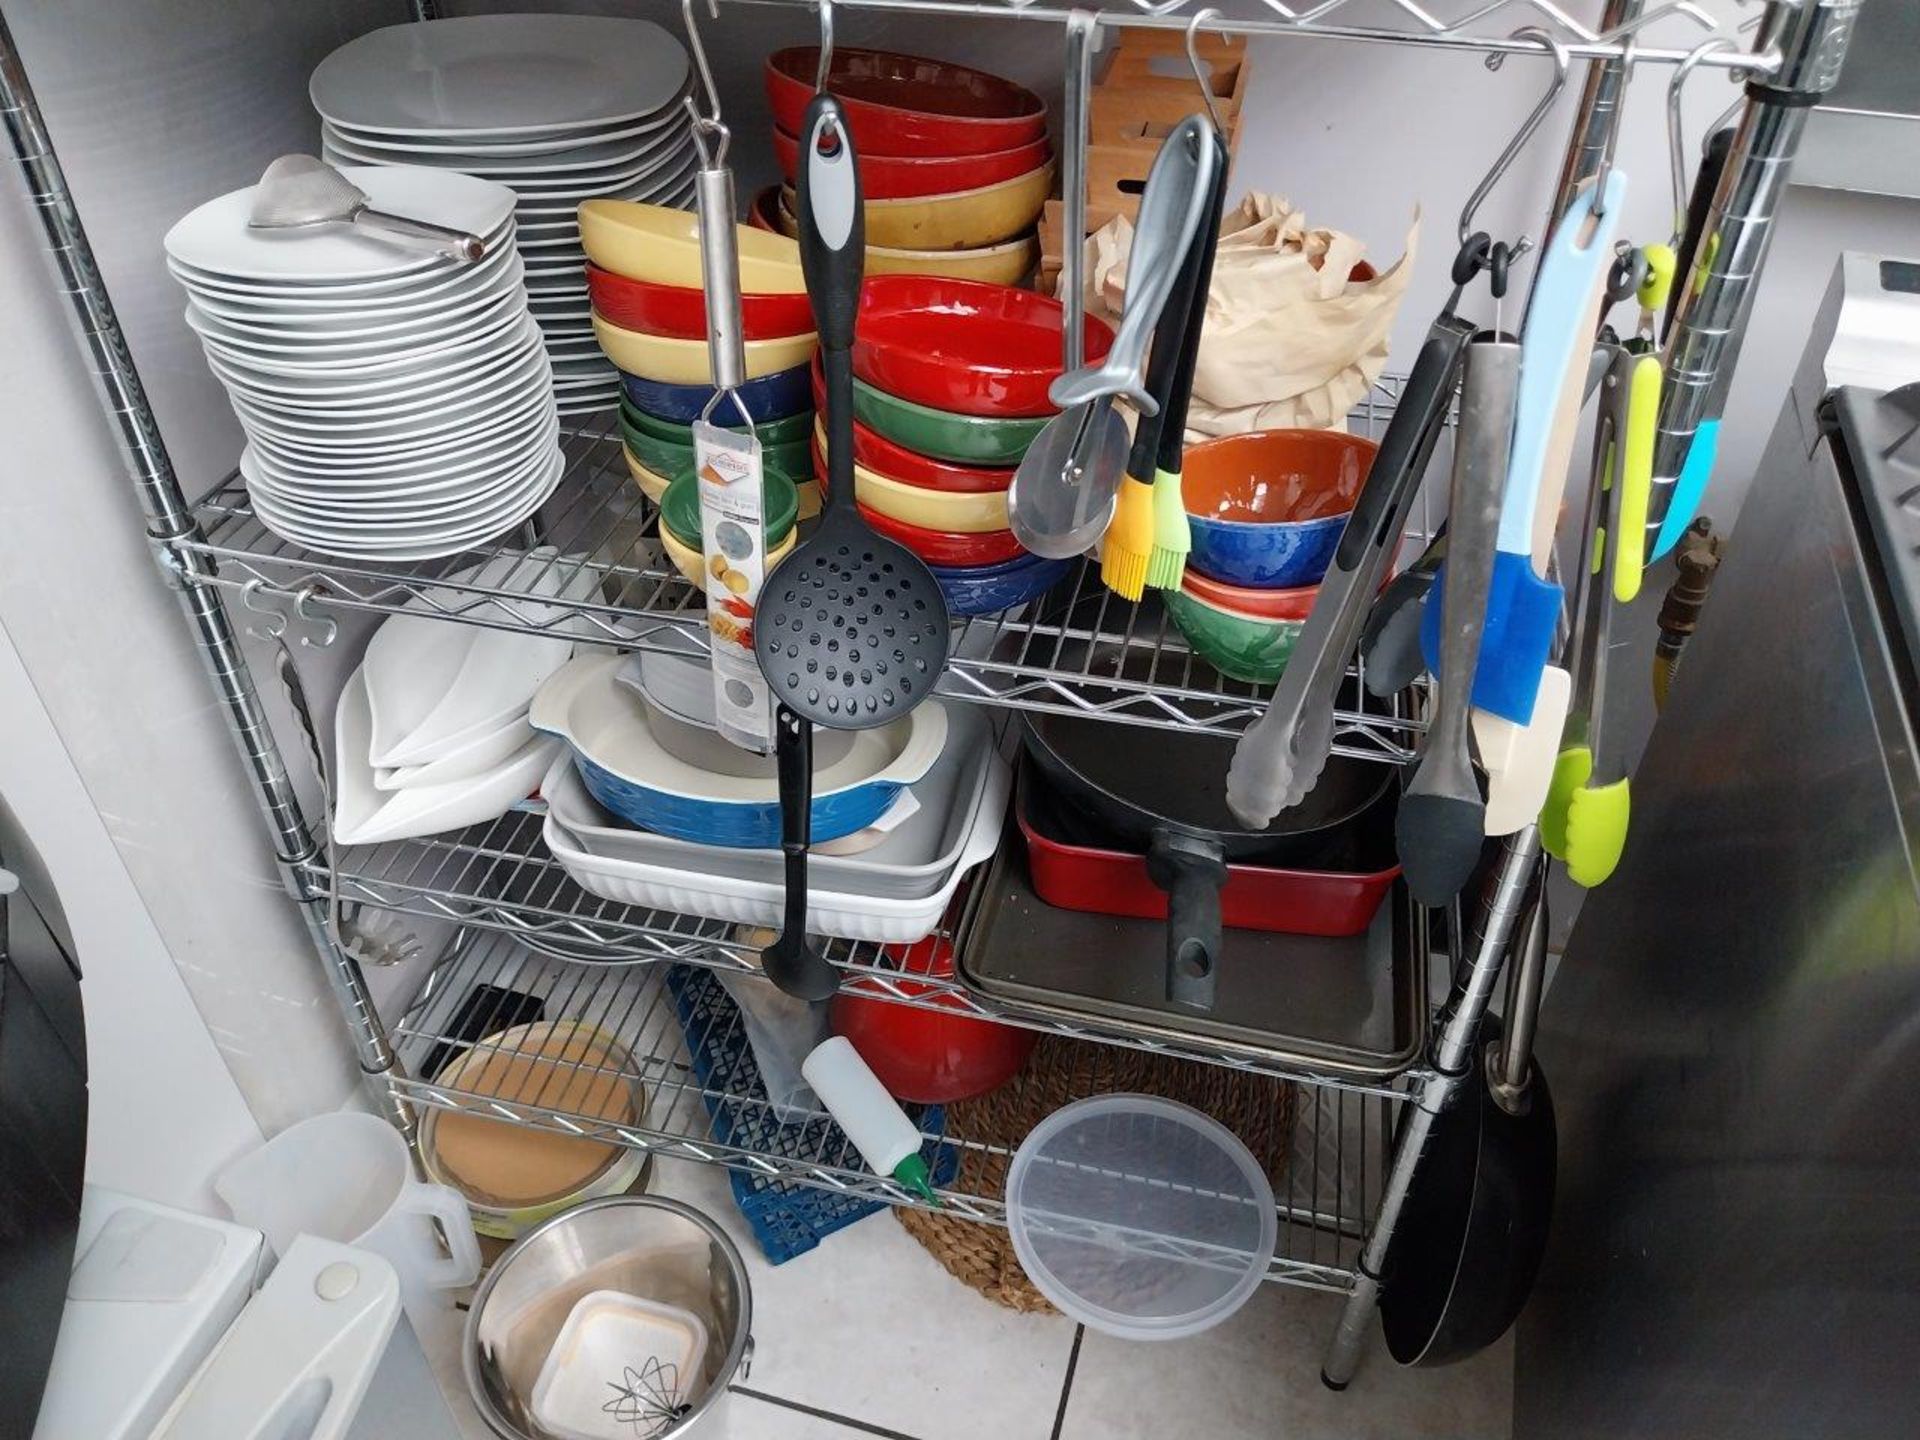 6 Tier Boltless Rack and Quantity of Crockery including Pans, Plates, Bowls, Cups, Ramakins, Trays - Image 3 of 6